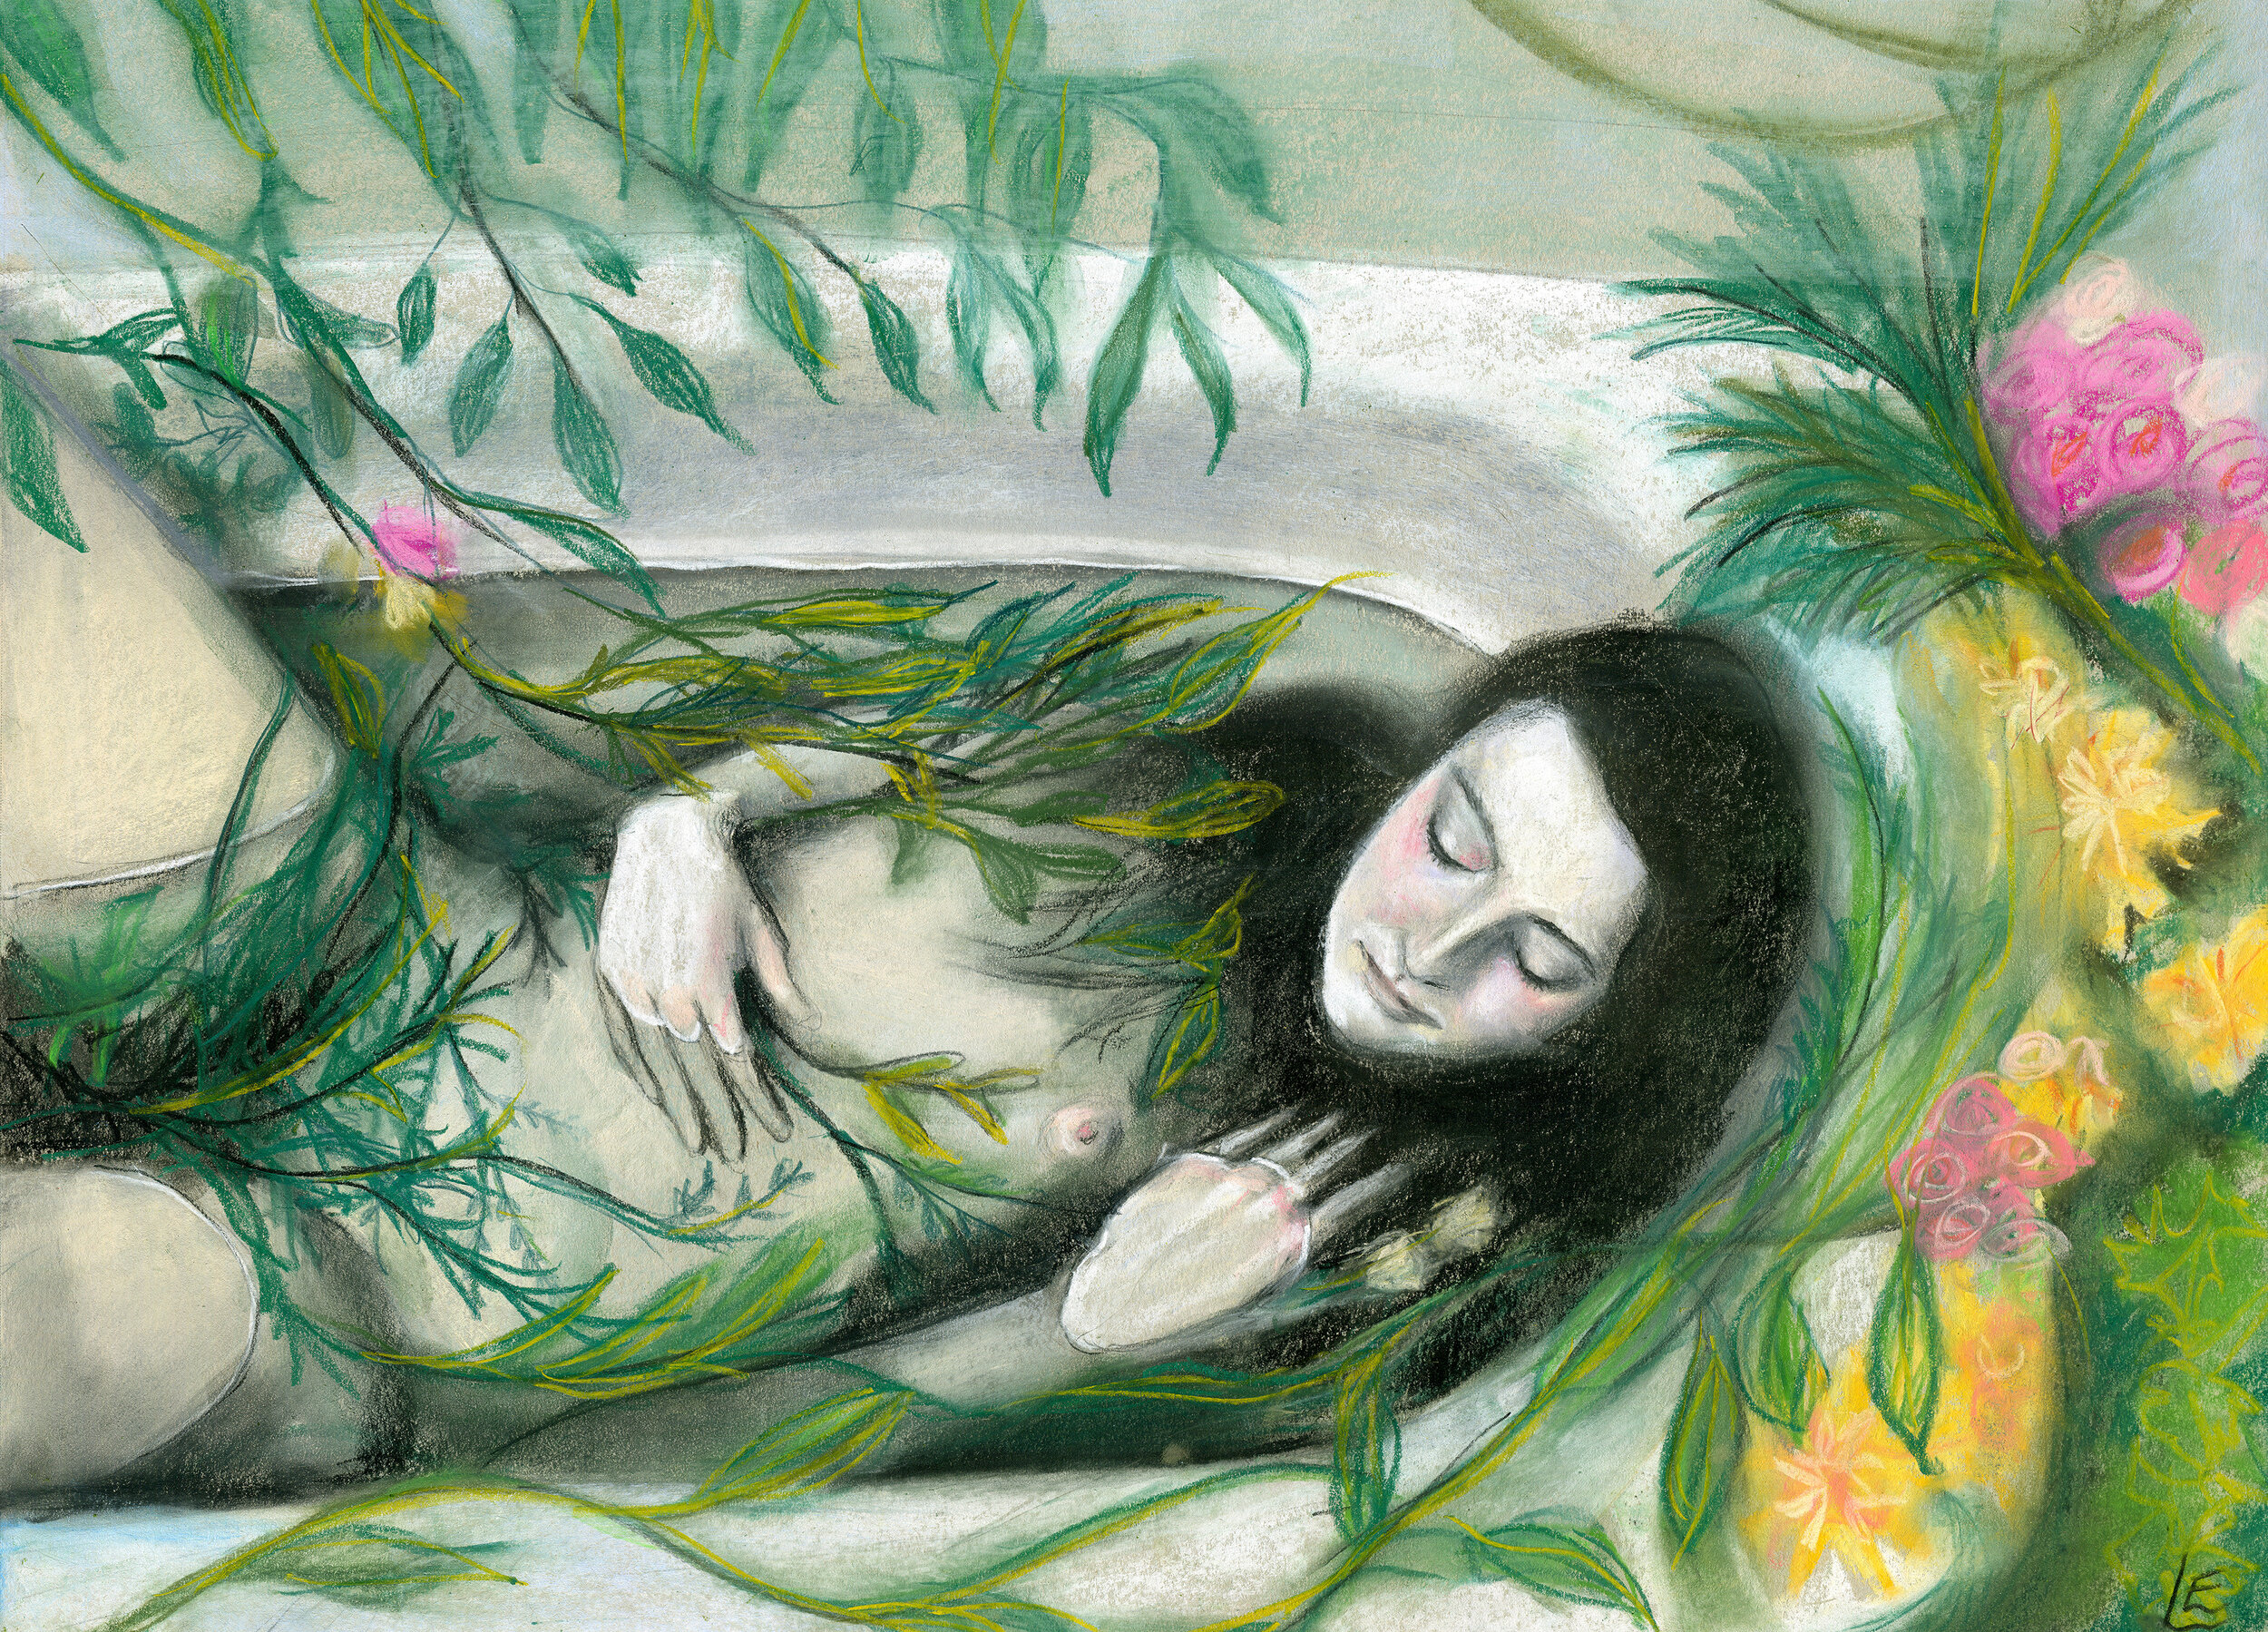 Daintree Dreaming in the Bath IV (Inspired by Ophelia)